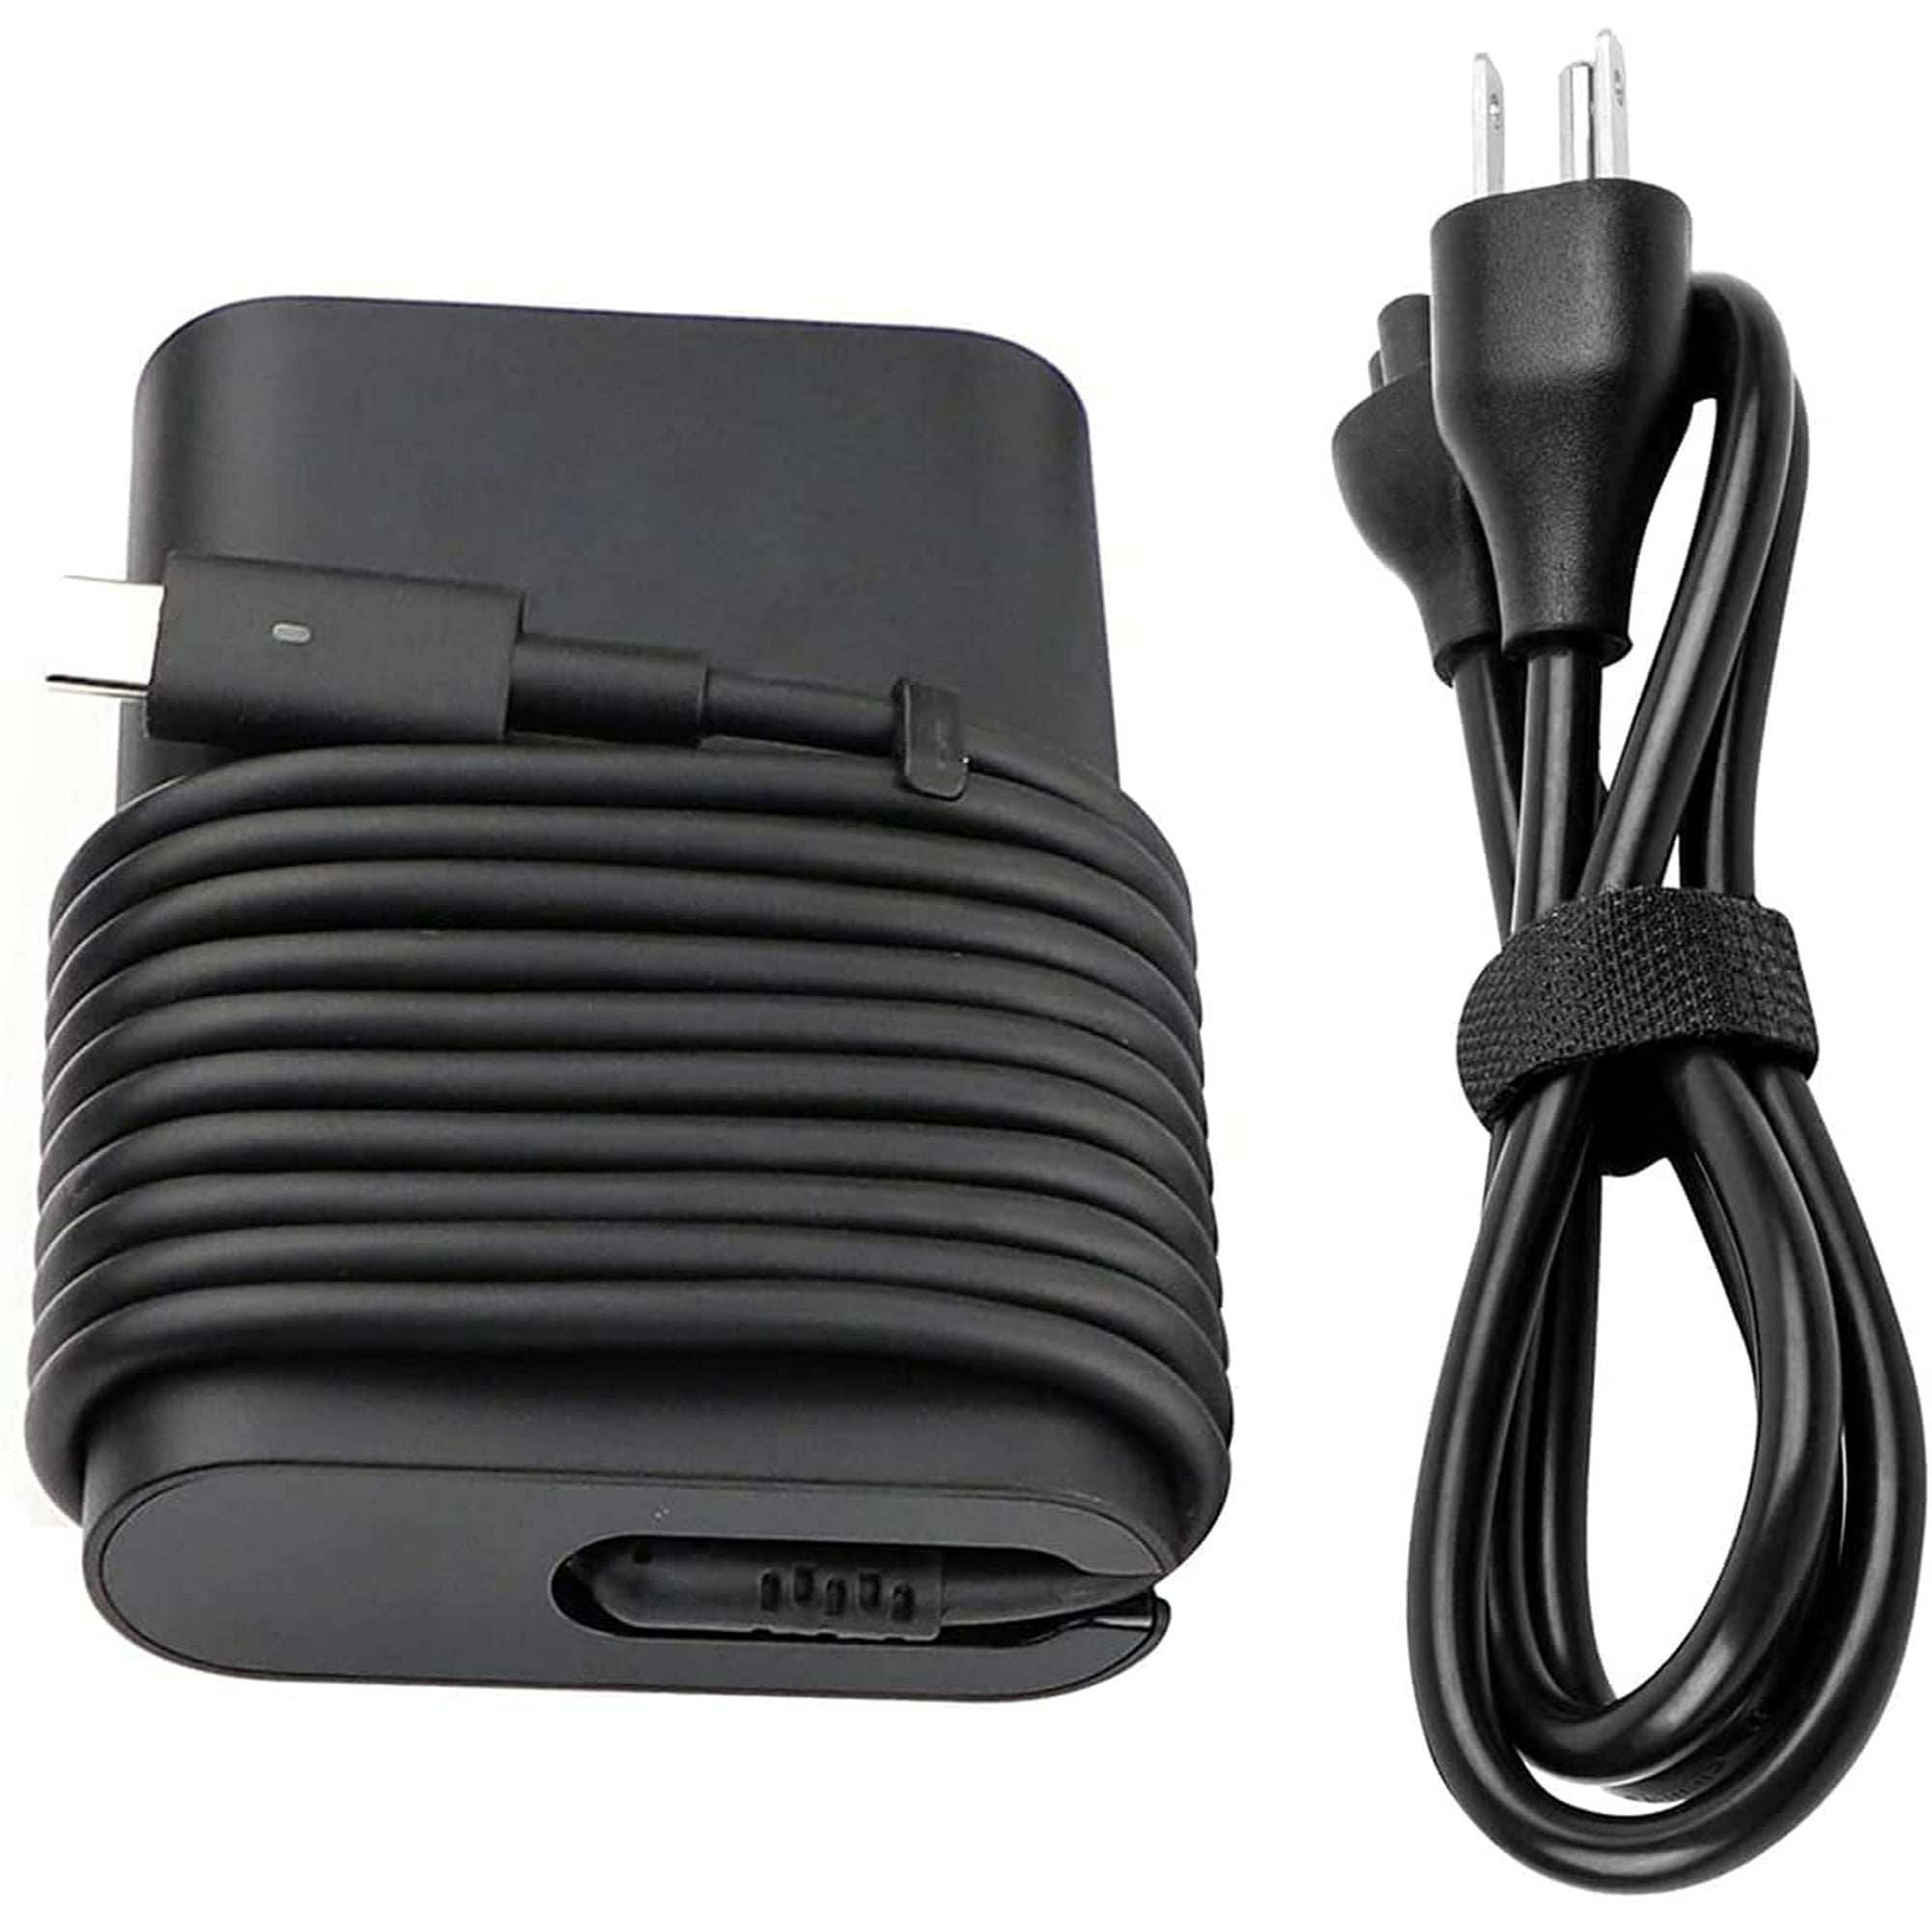 65W Type-C Charger Fit for Dell Latitude 12 5285 5289 5290 7212 7275 7285  7290, XPS 13 9350 9360 9365 9370 Laptop Power | Walmart Canada